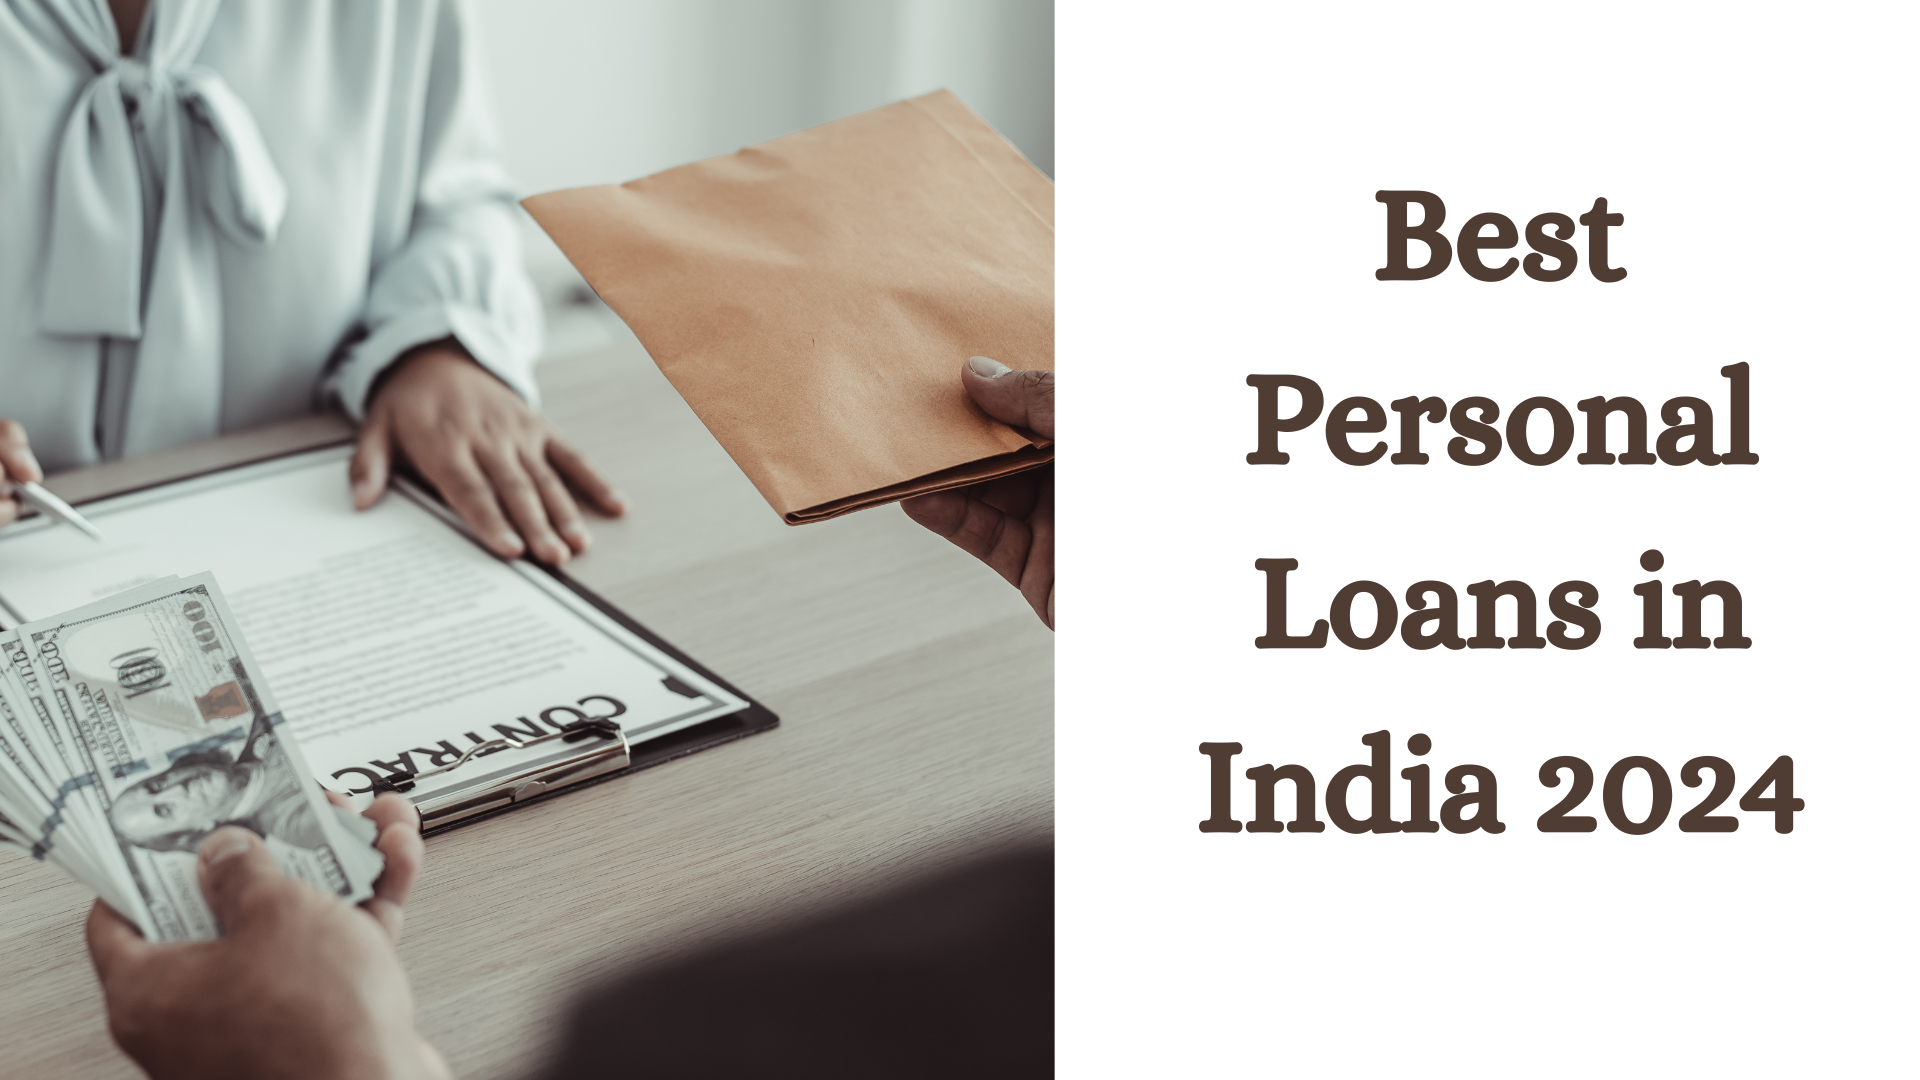 Best Personal Loans in India 2024